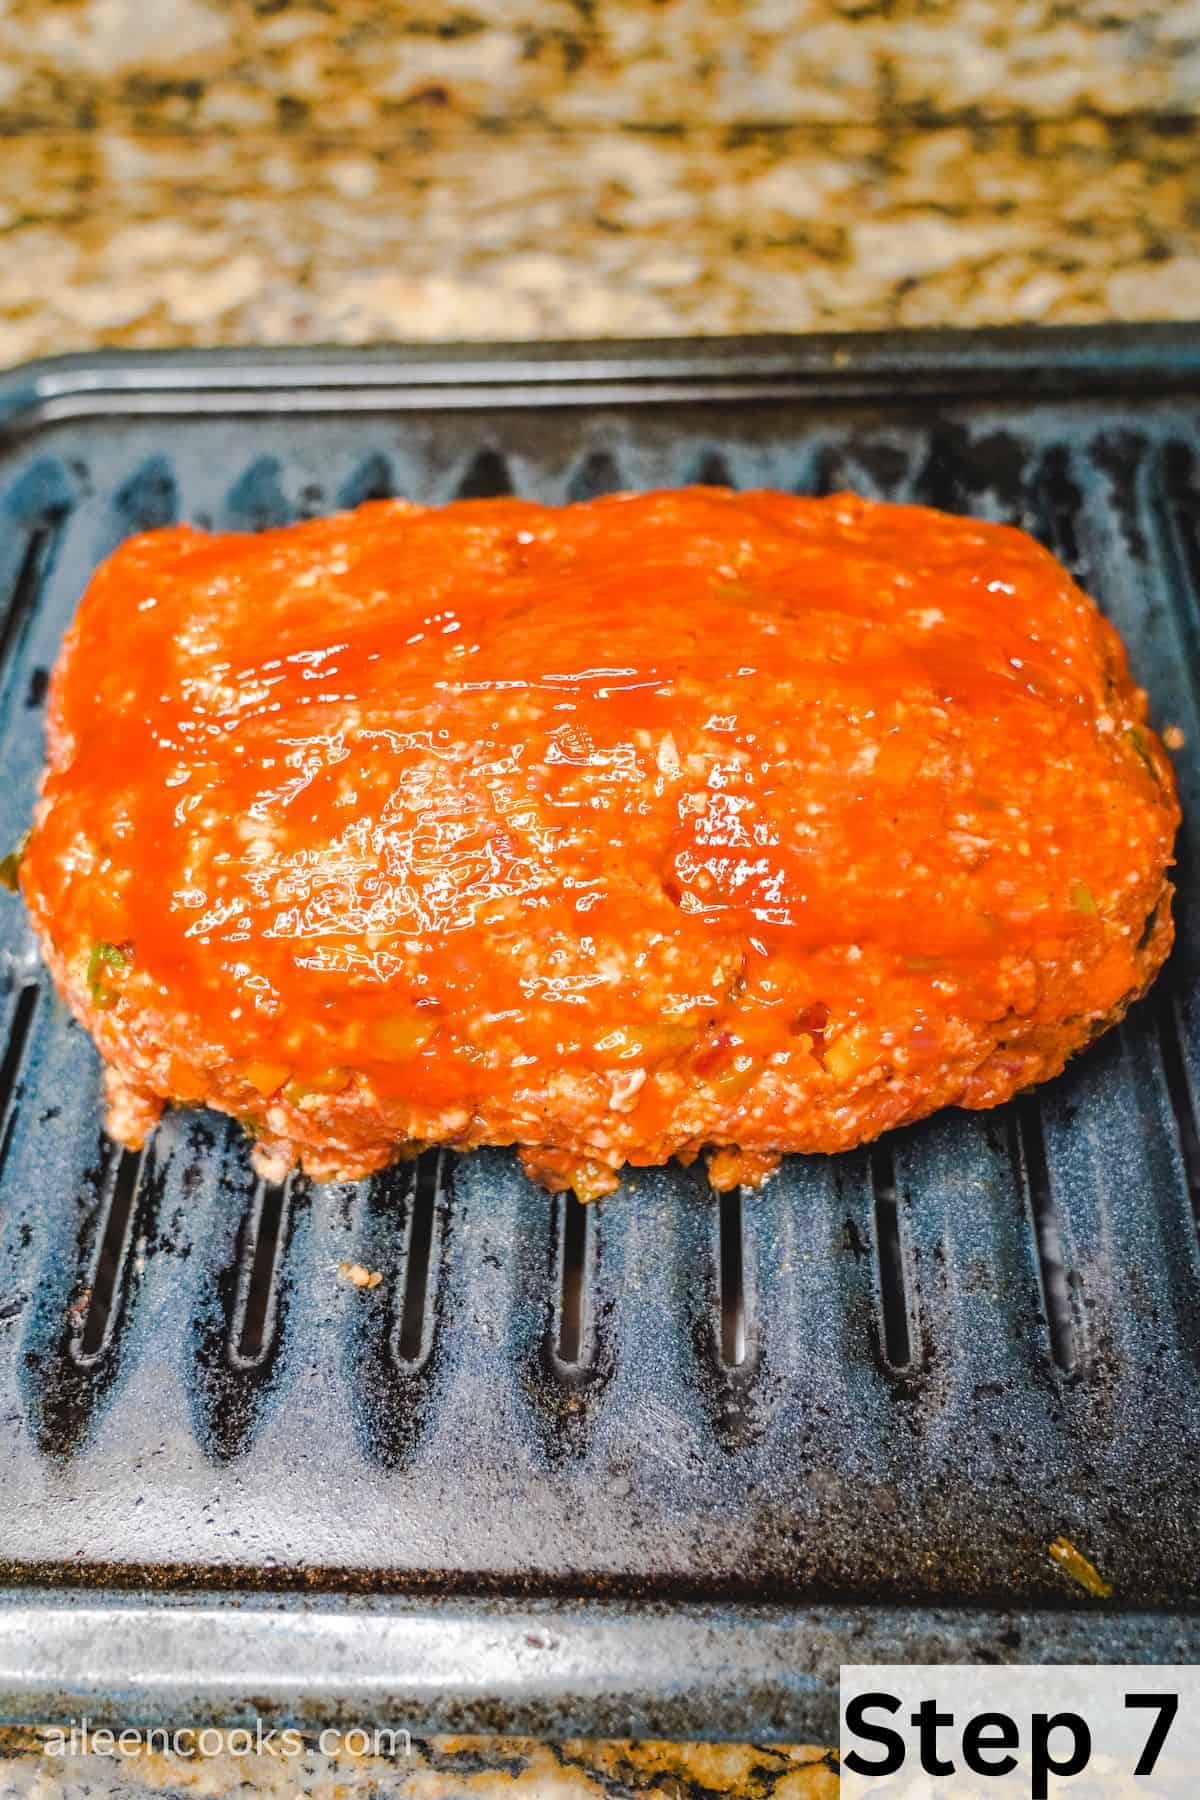 A shaped meatloaf coated in a ketchup glaze, on top of a broiler pan.